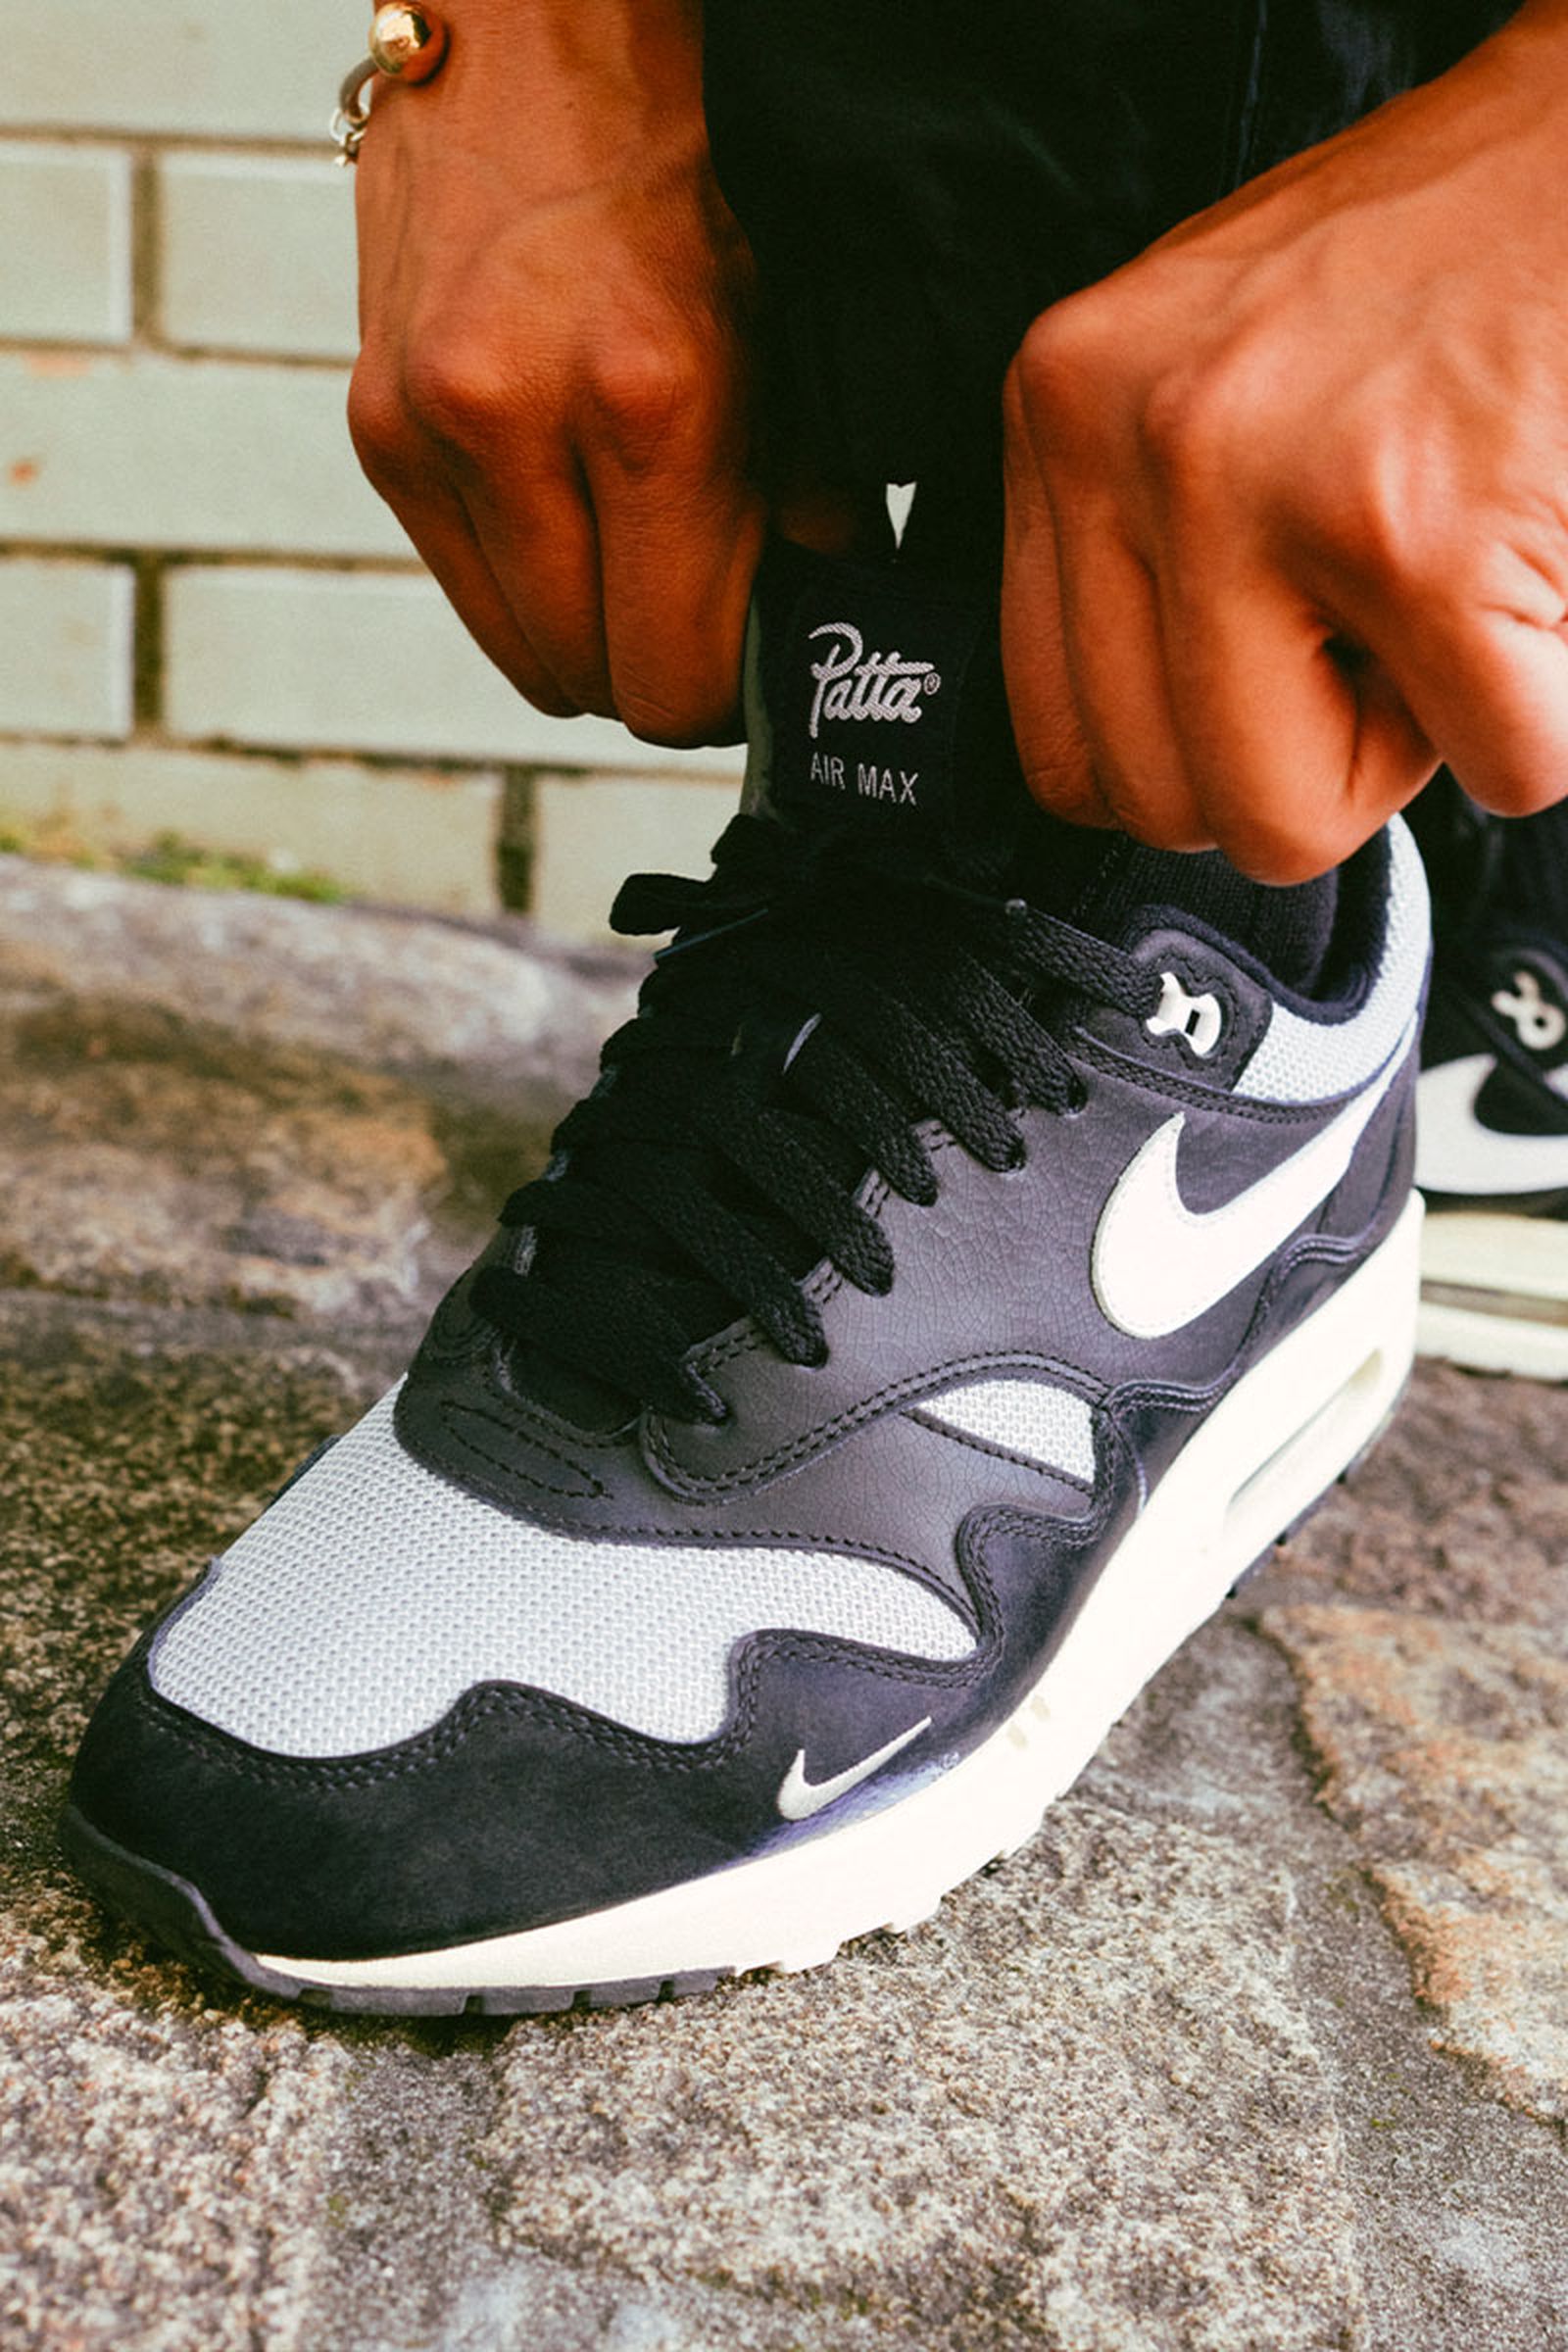 nike-patta-the-wave-chapter-4-03